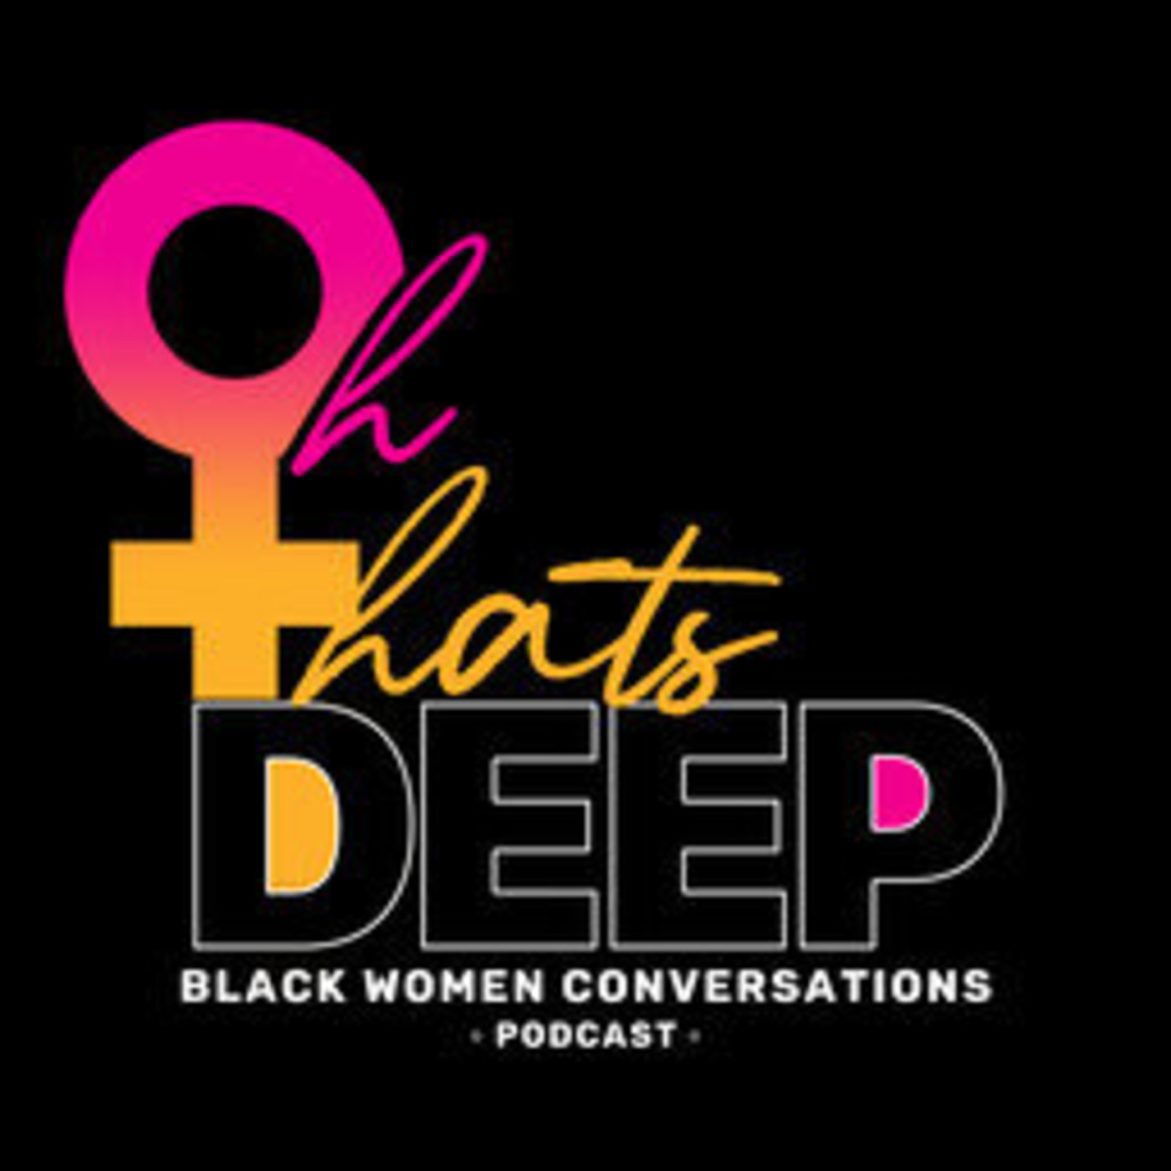 Black Podcasting - From Your Timeline to Ours